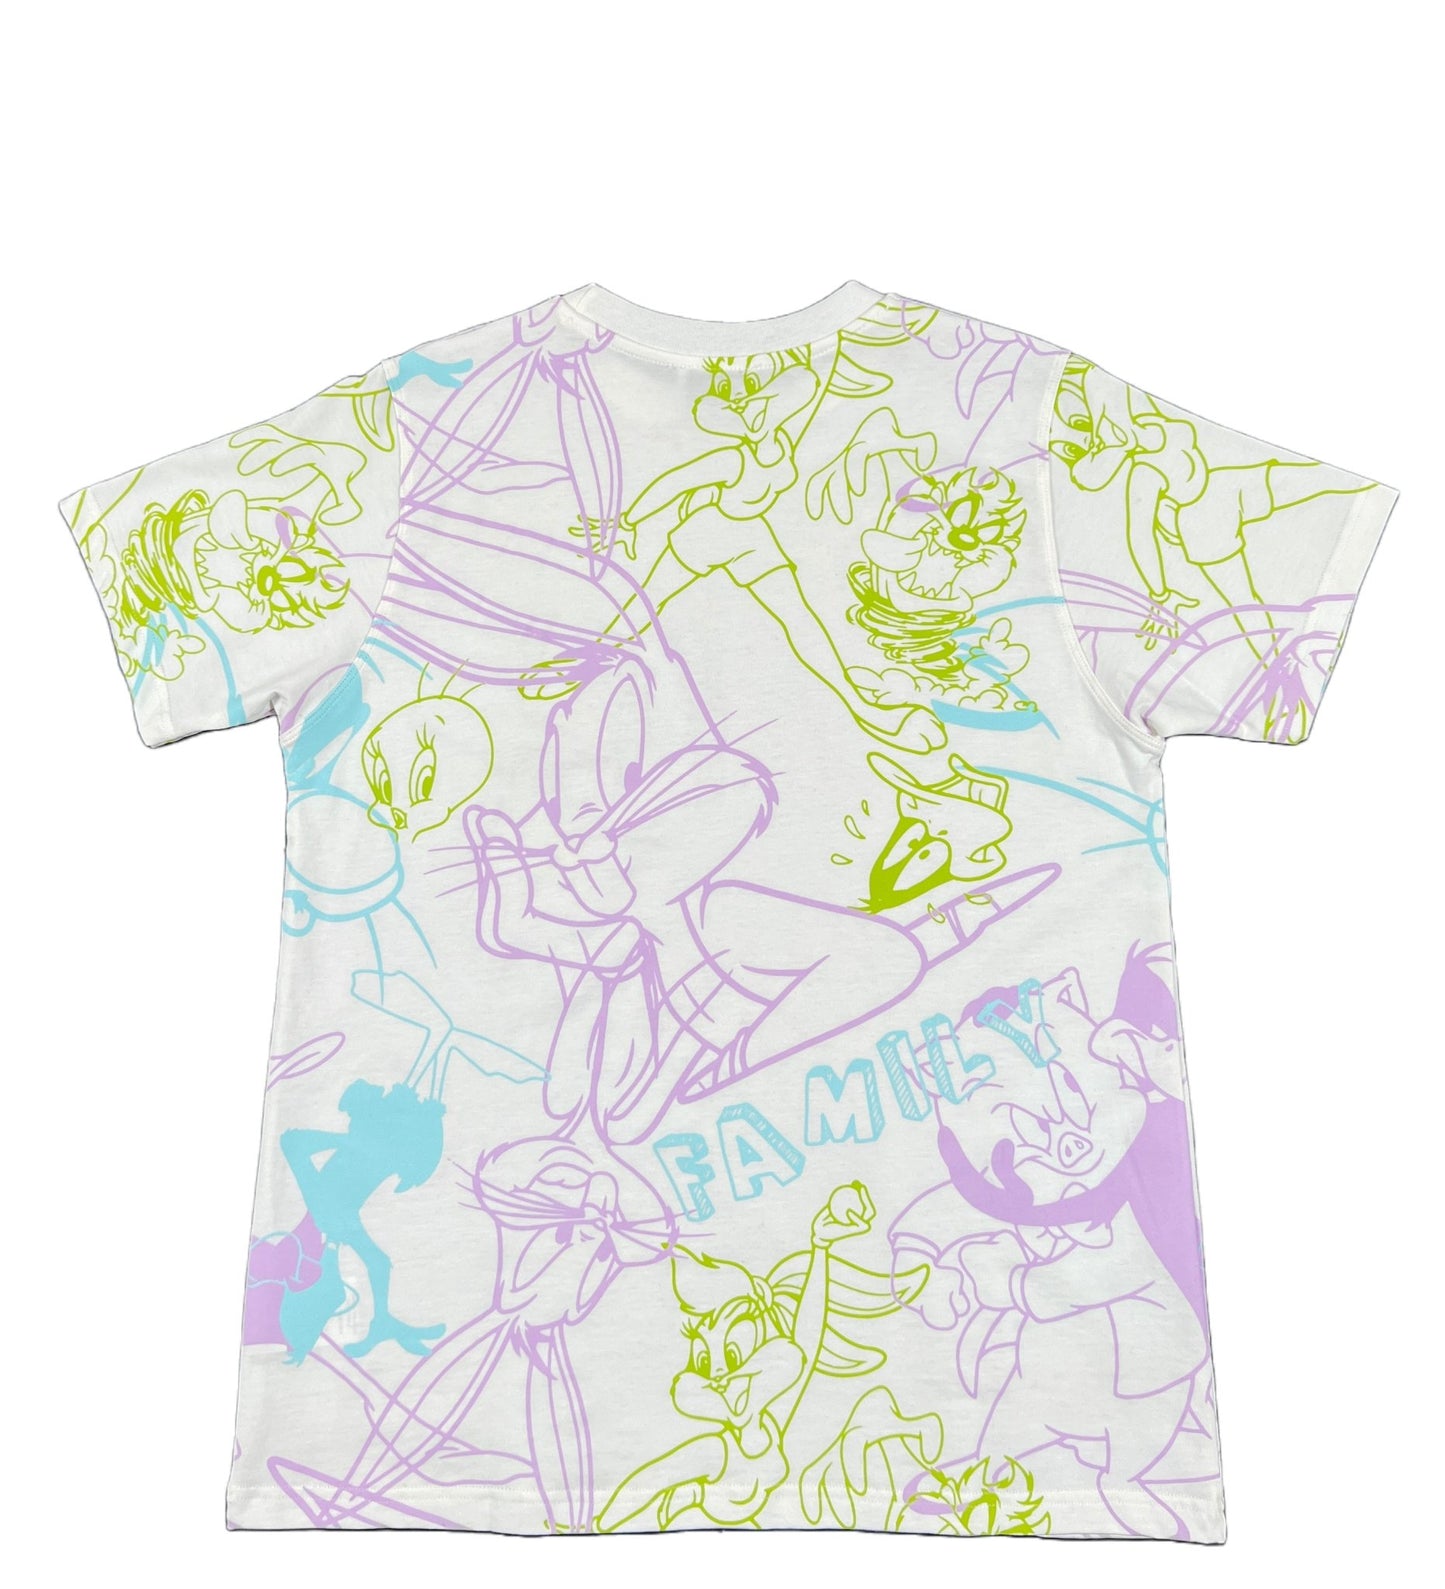 A FAMILY FIRST TS2321 T-SHIRT PALITA WHITE with cartoon characters on it, made in Italy.